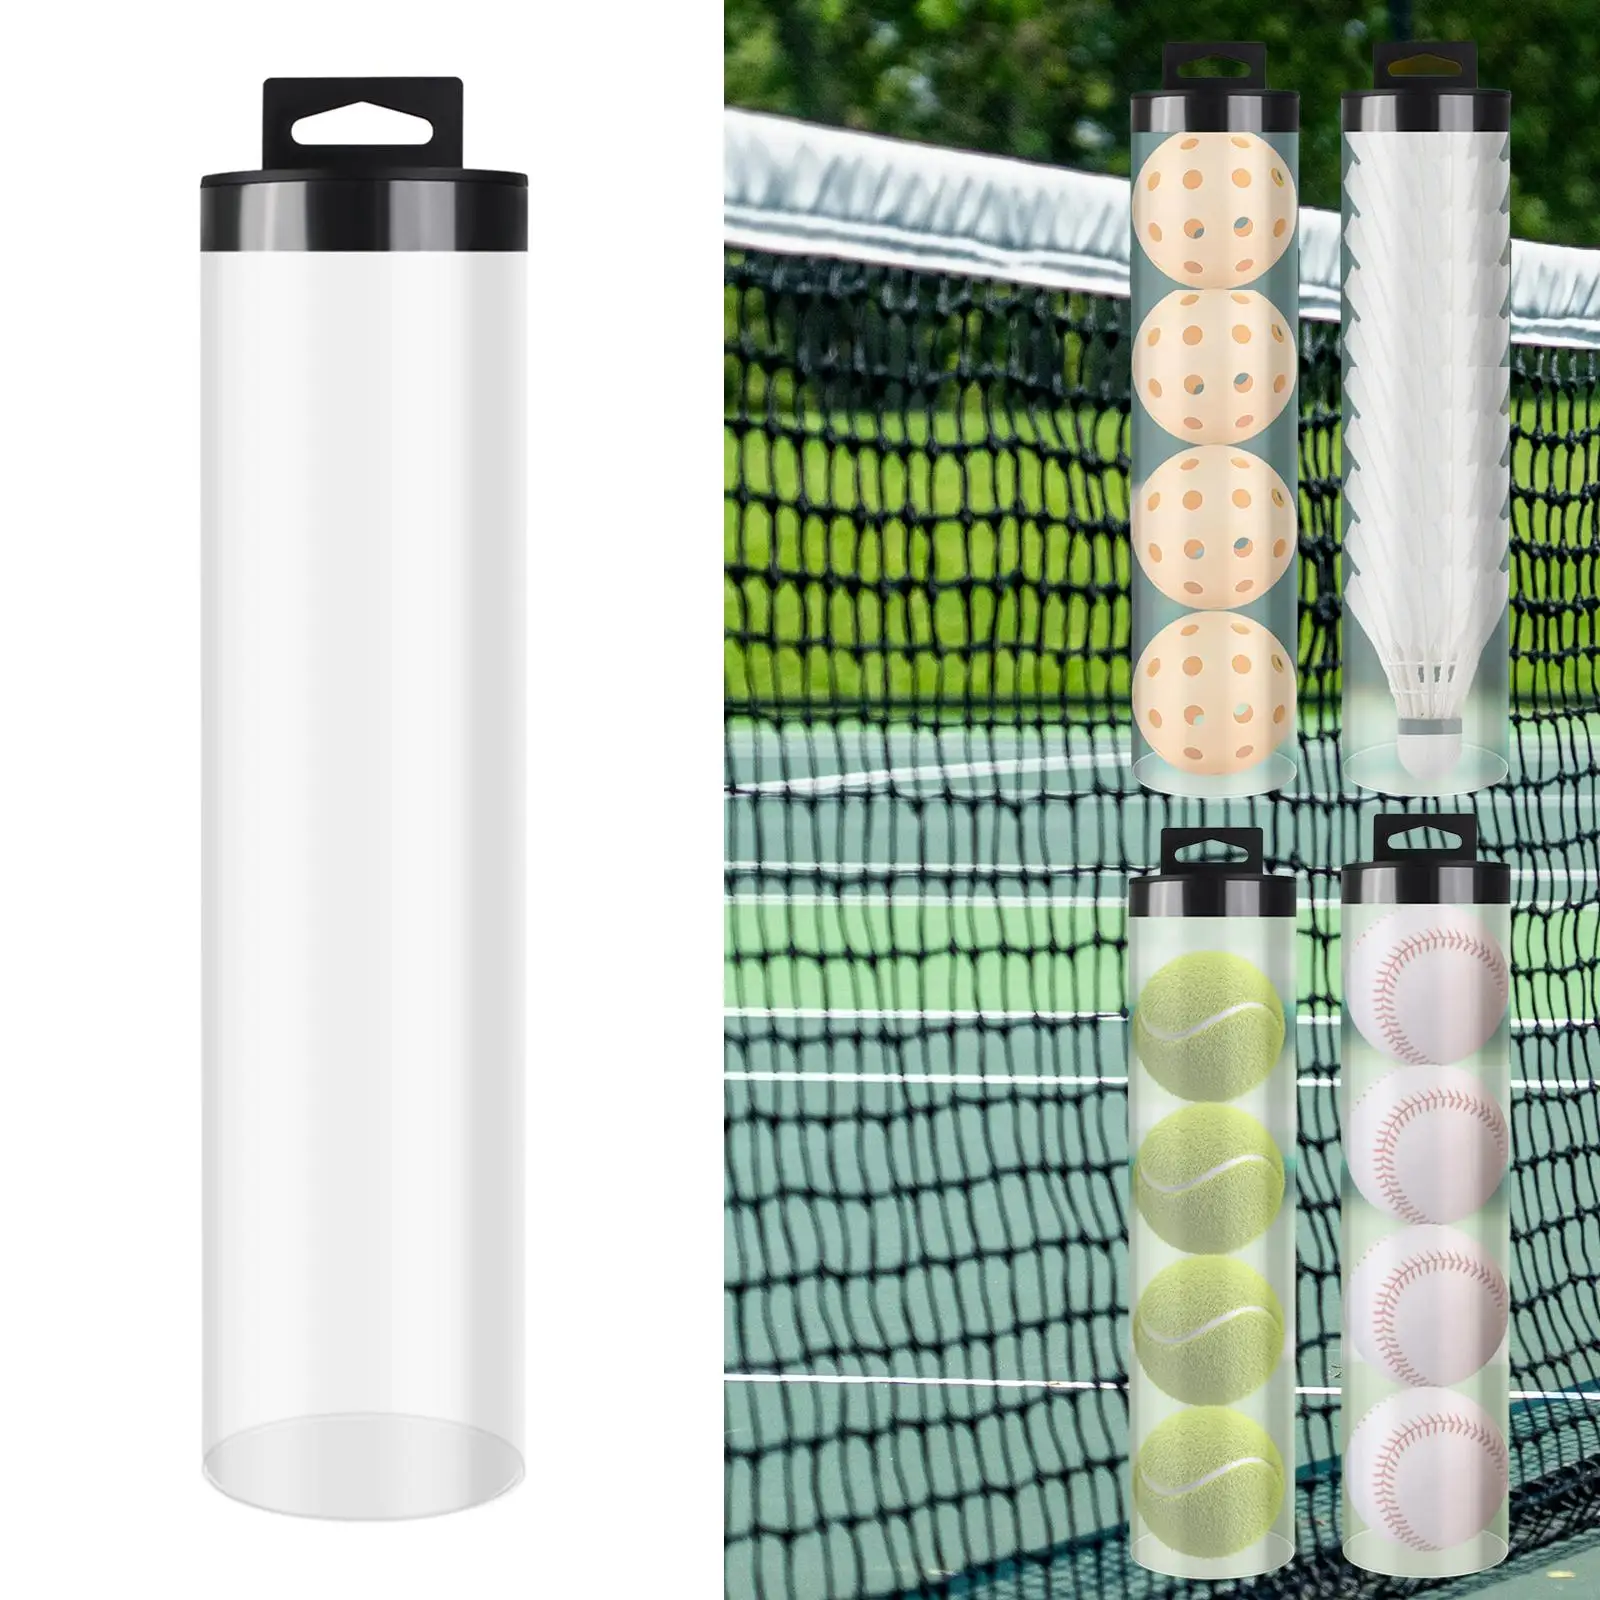 Tennis Ball Can Holder Pickleball Ball Storage Tube Durable Pickleball Storage Container for Golf Practice Outdoor Training